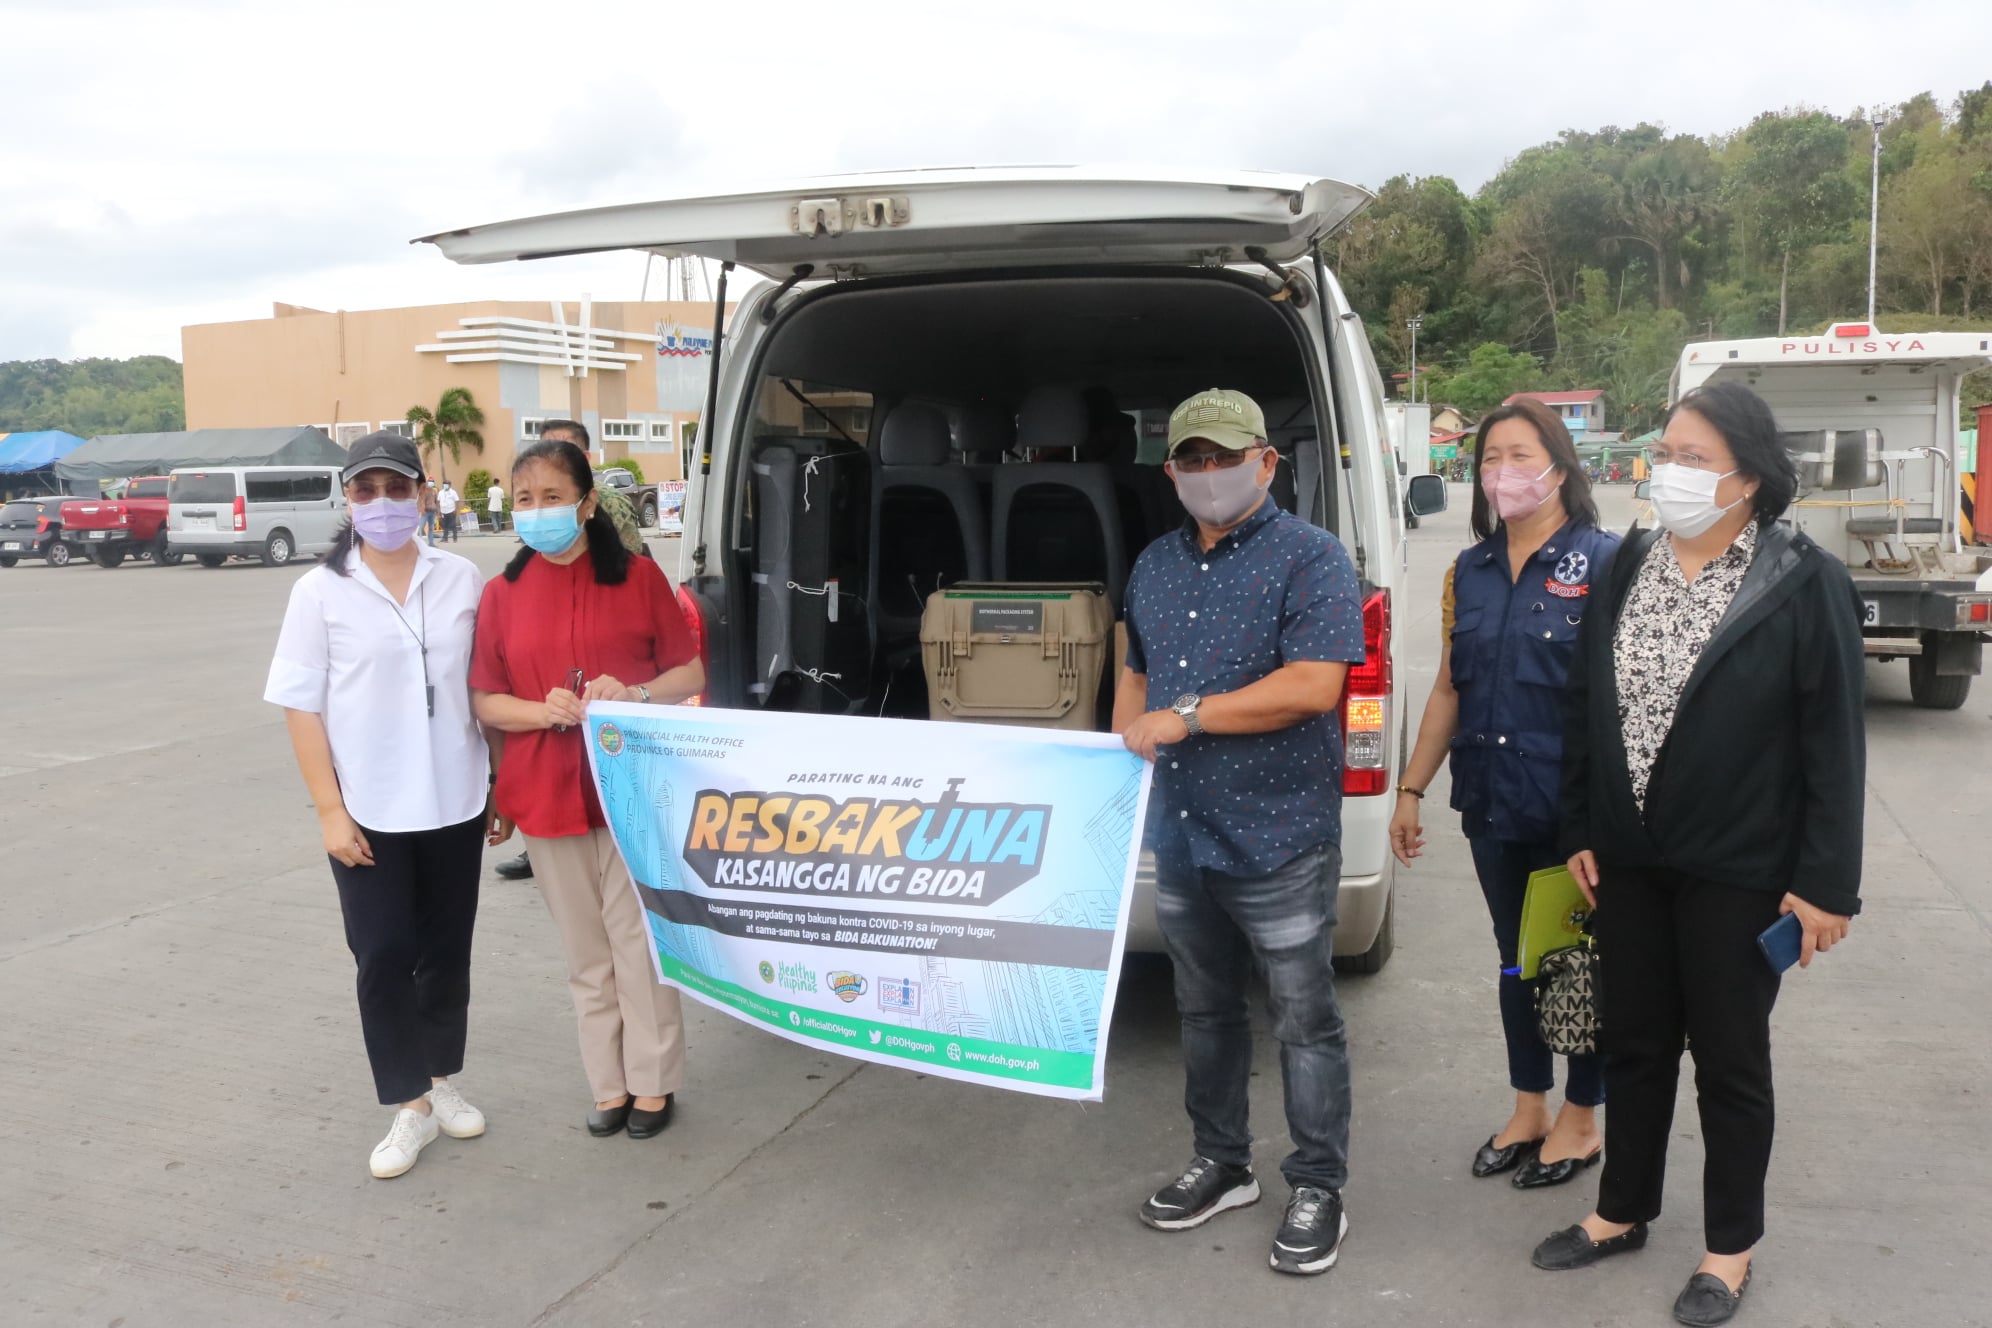 Guimaras Welcomes the Arrival of Covid-19 Vaccines